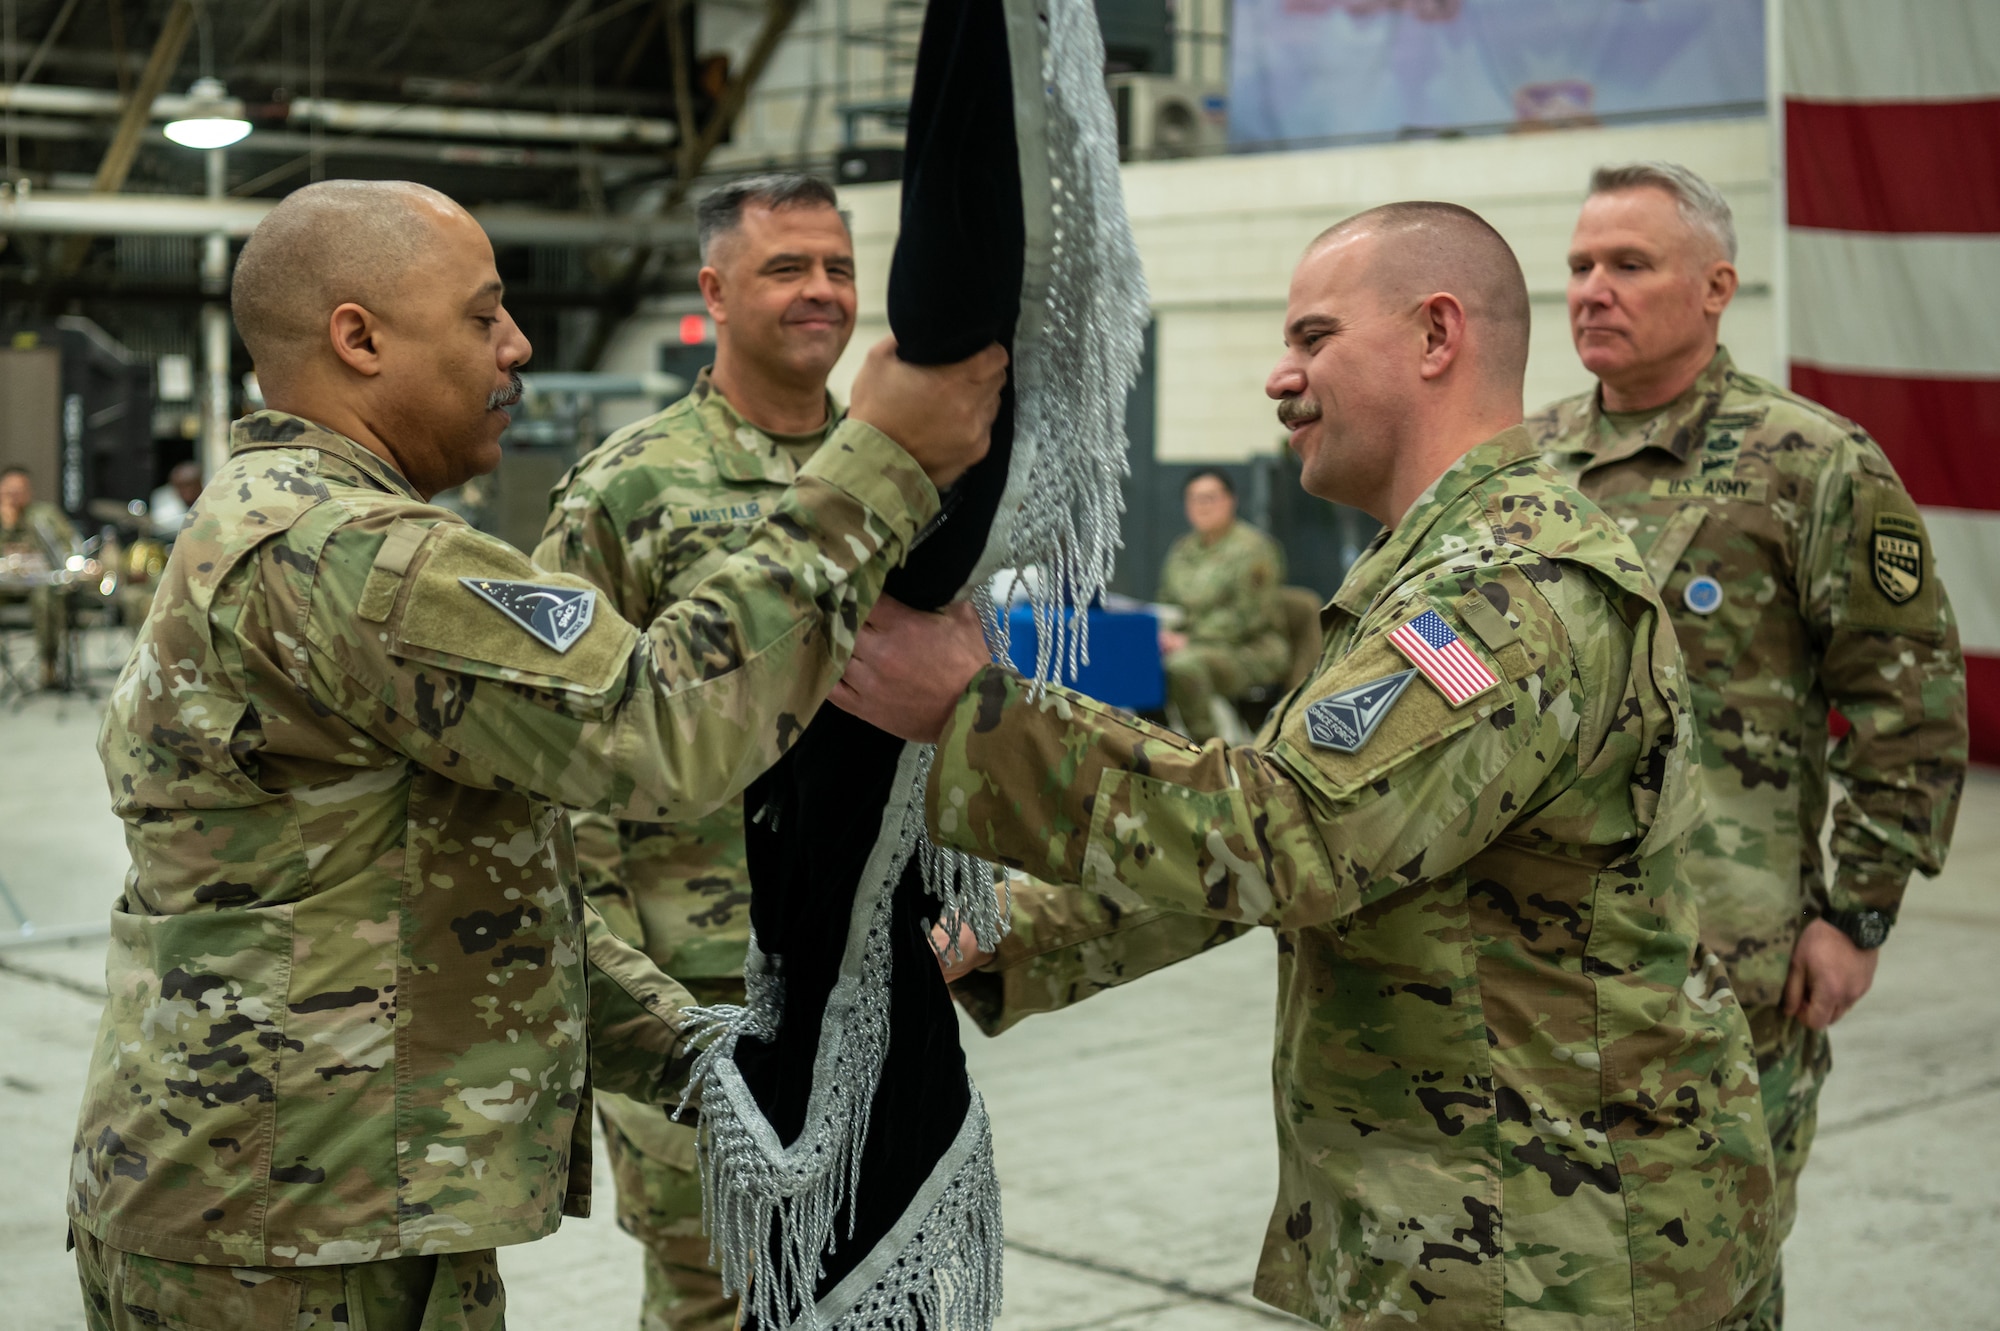 U.S. Space Force Lt. Col. Joshua McCullion, U.S. Space Forces Korea inaugural commander, passes the guidon to U.S. Space Force Master Sgt. Cederic Hill, USSFK senior enlisted leader, during the USSFK activation ceremony at Osan Air Base, Republic of Korea, Dec. 14, 2022.